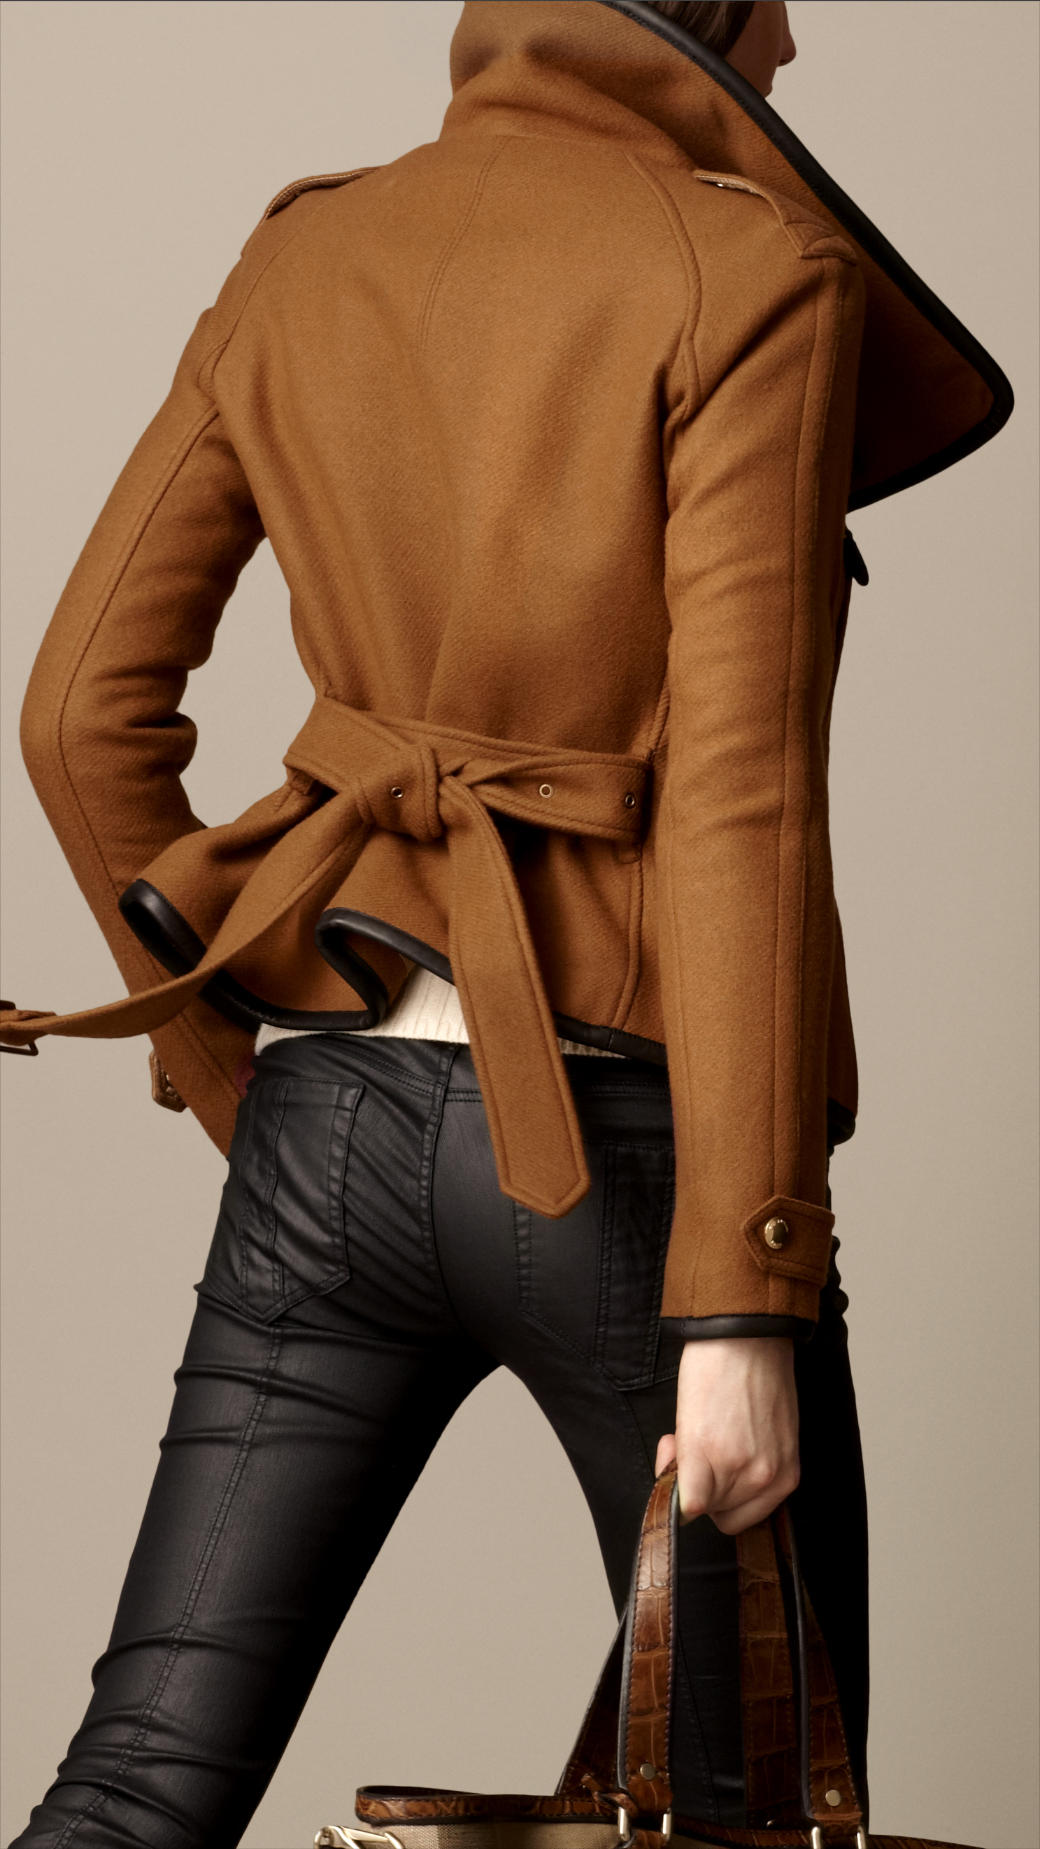 Lyst - Burberry Leather Trim Blanket Wrap Jacket in Brown